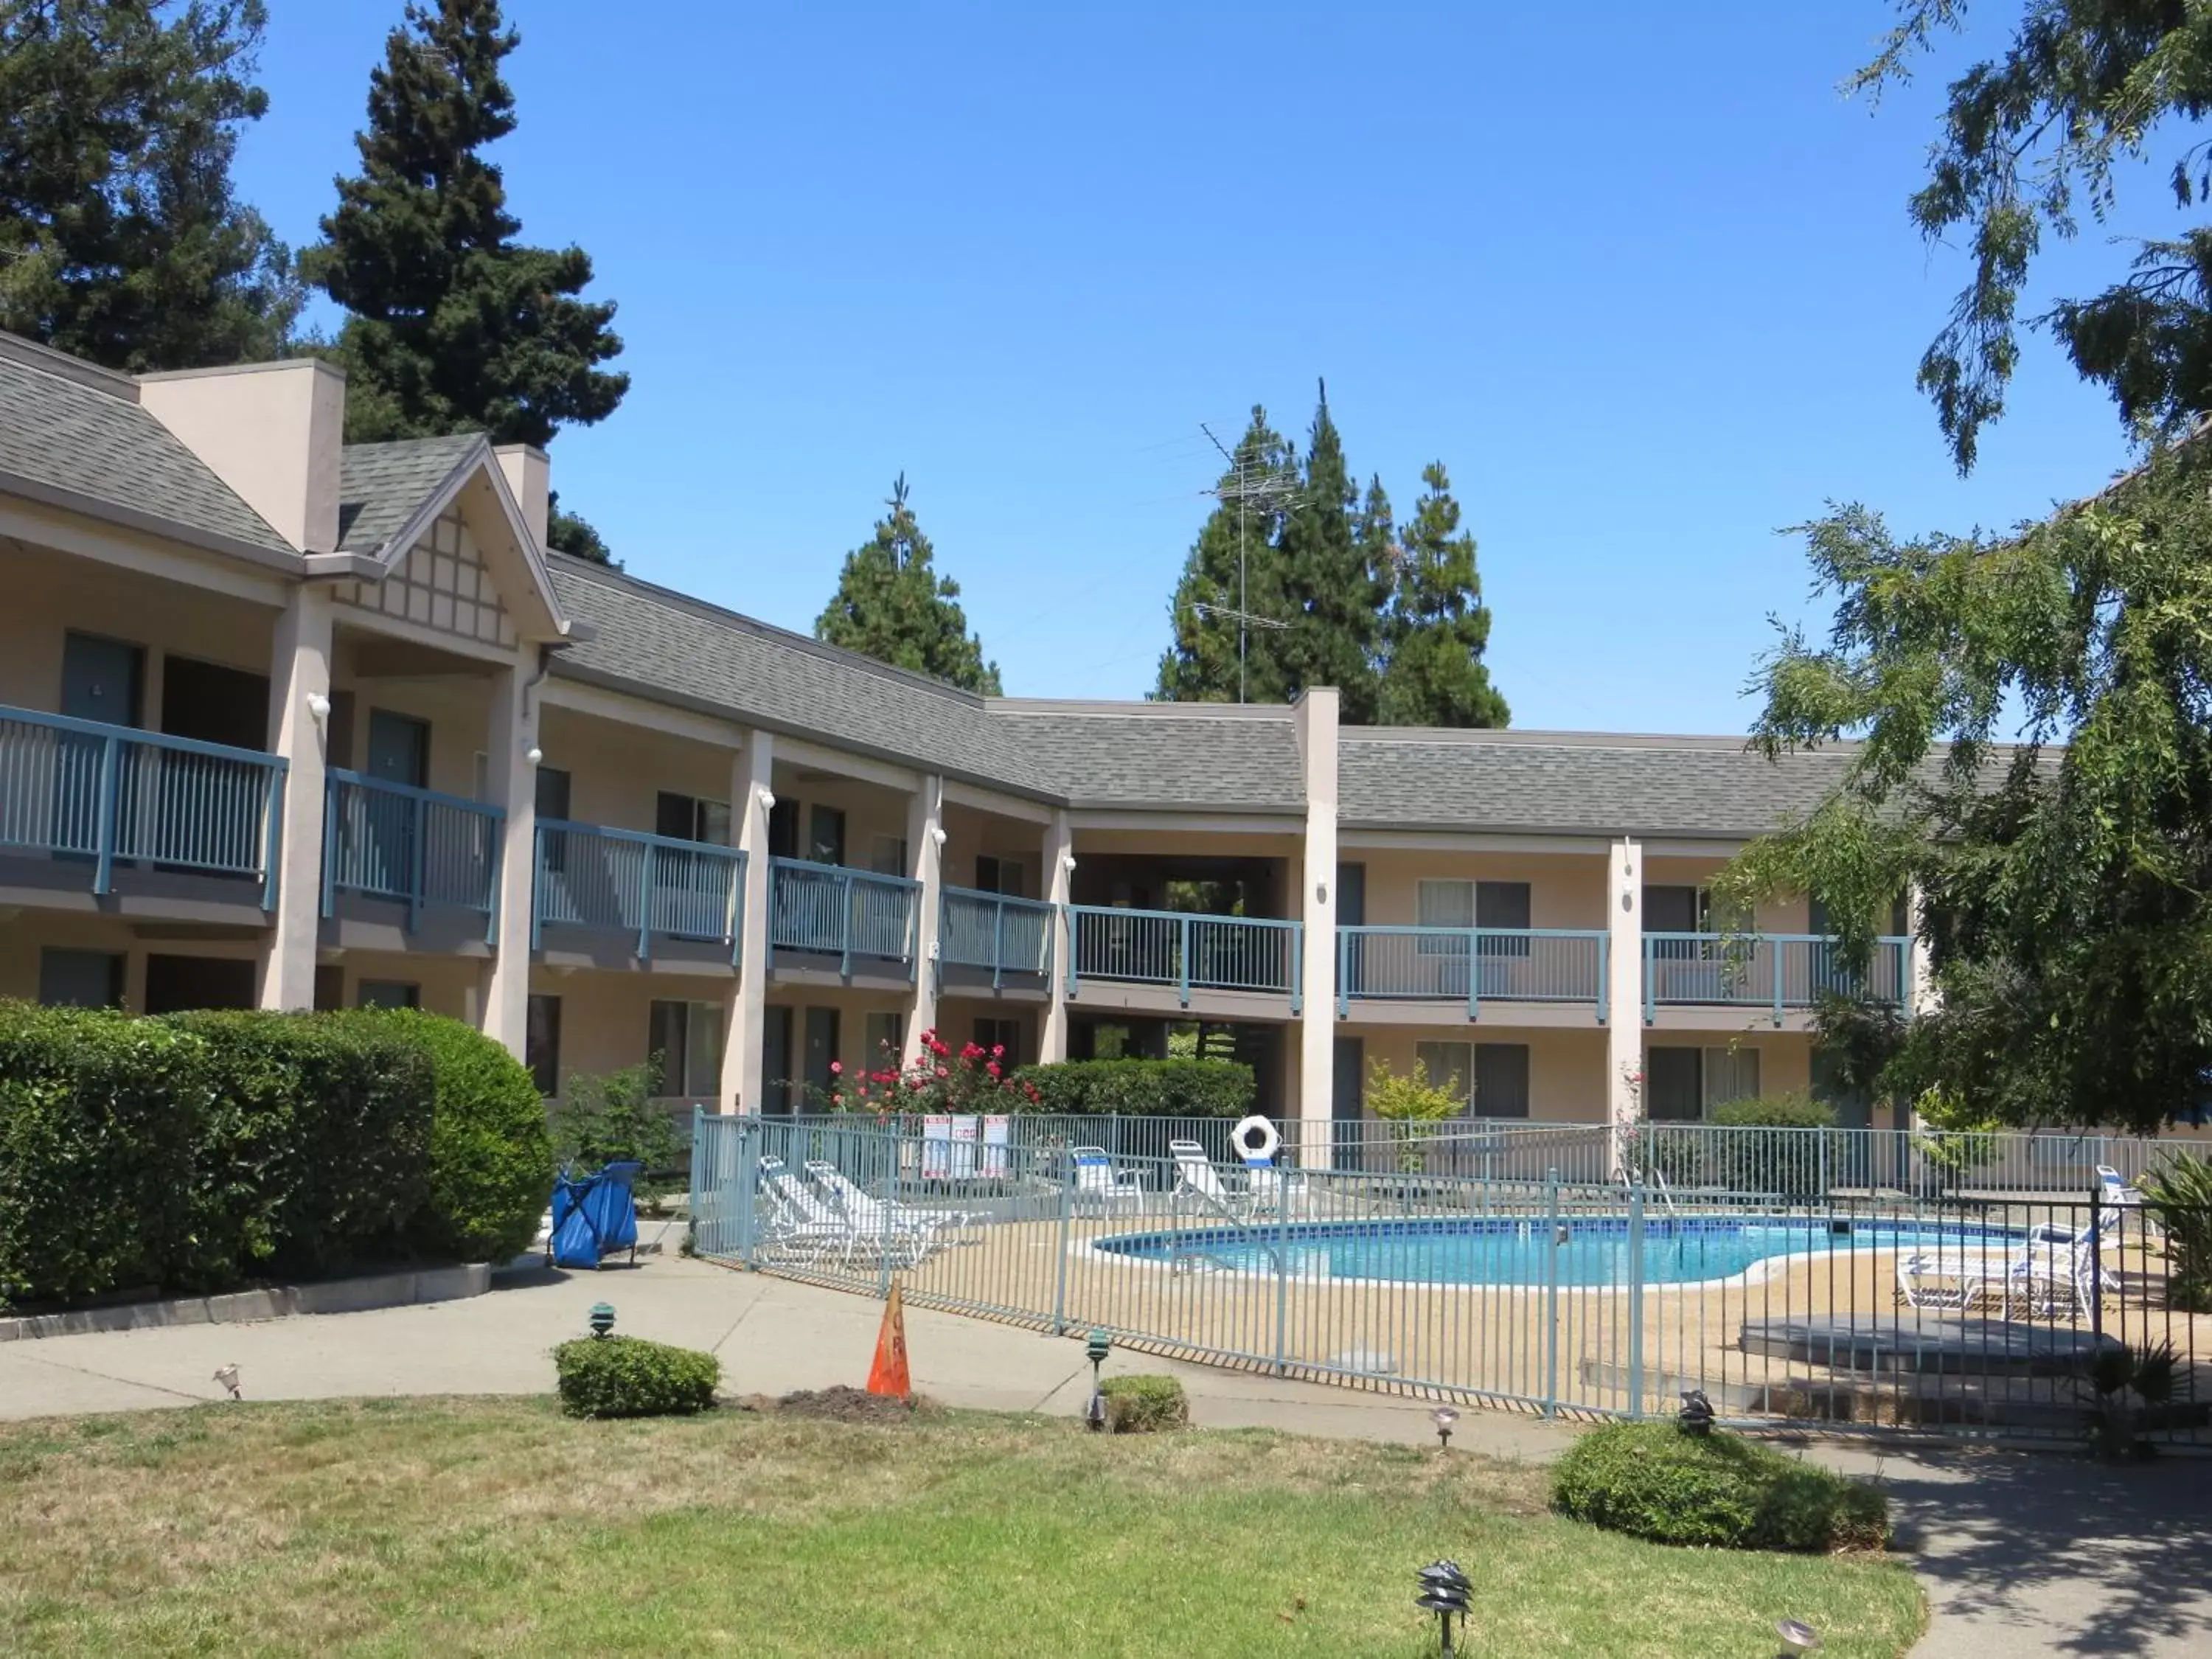 Property building, Swimming Pool in Days Inn by Wyndham Redwood City